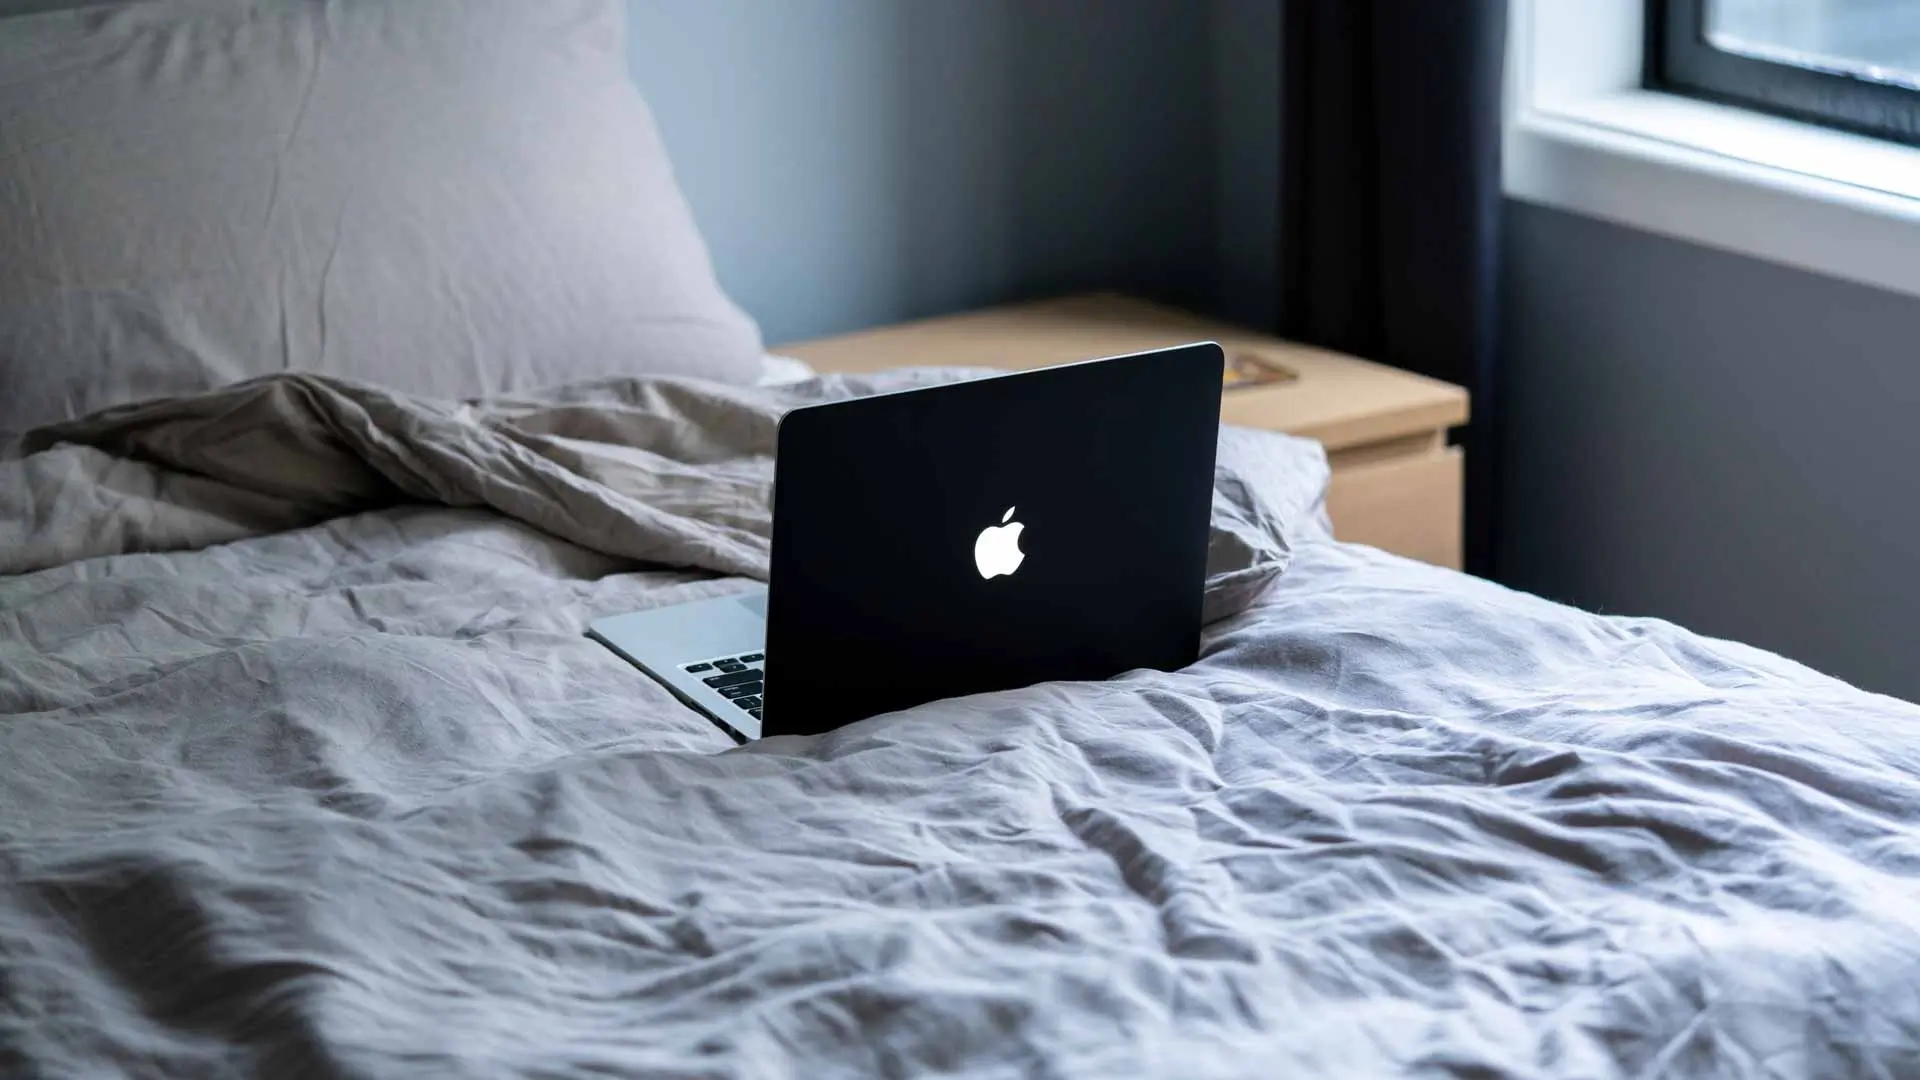 Unsplash photo by Justin Morgan of a MacBook Pro sitting on a bed